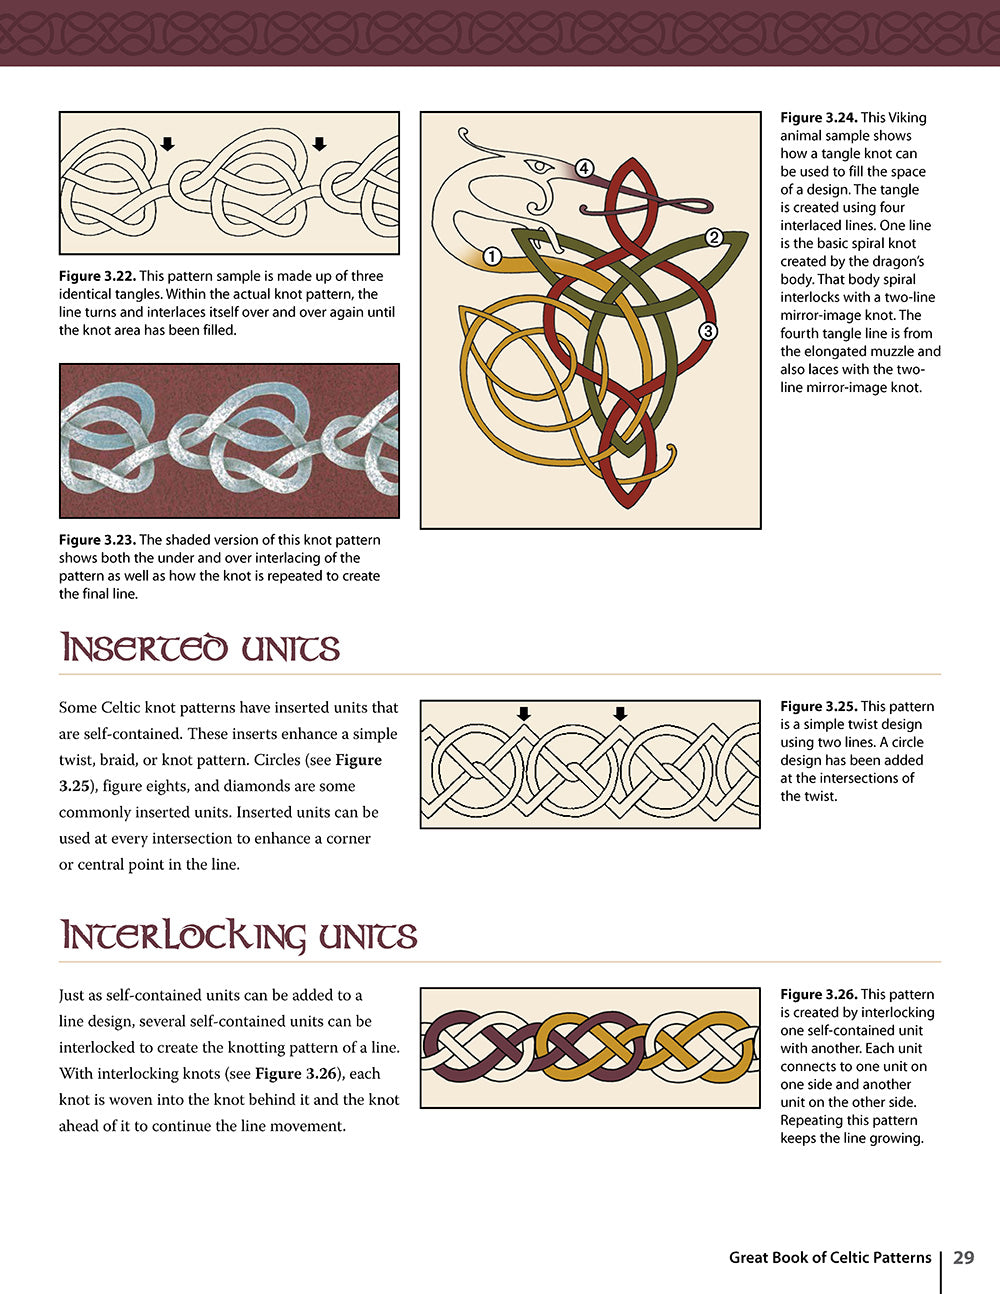 Great Book of Celtic Patterns